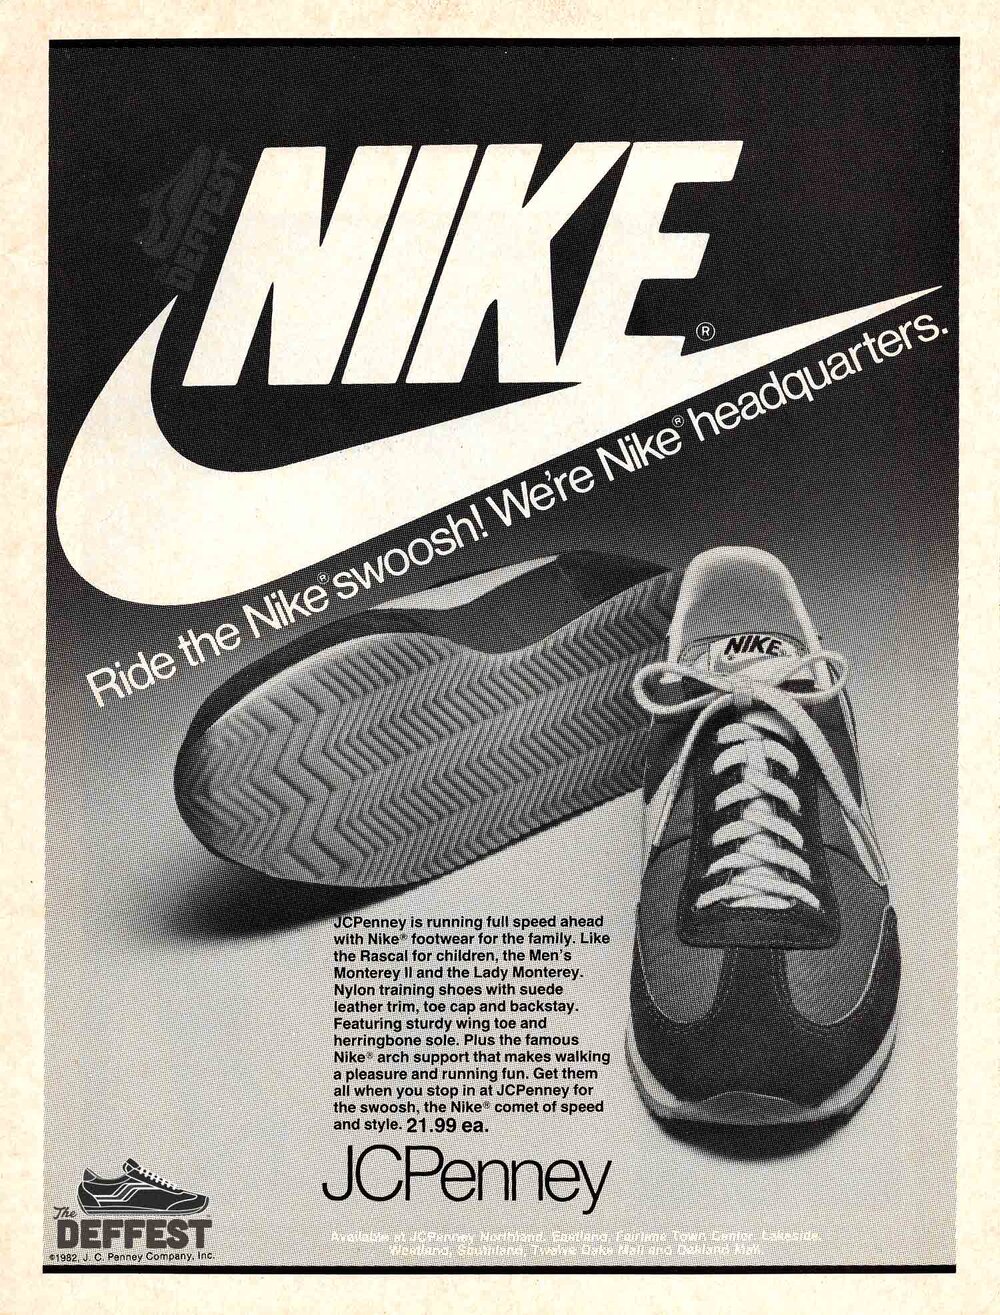 Vintage Nike — The Deffest®. A vintage and retro sneaker blog 